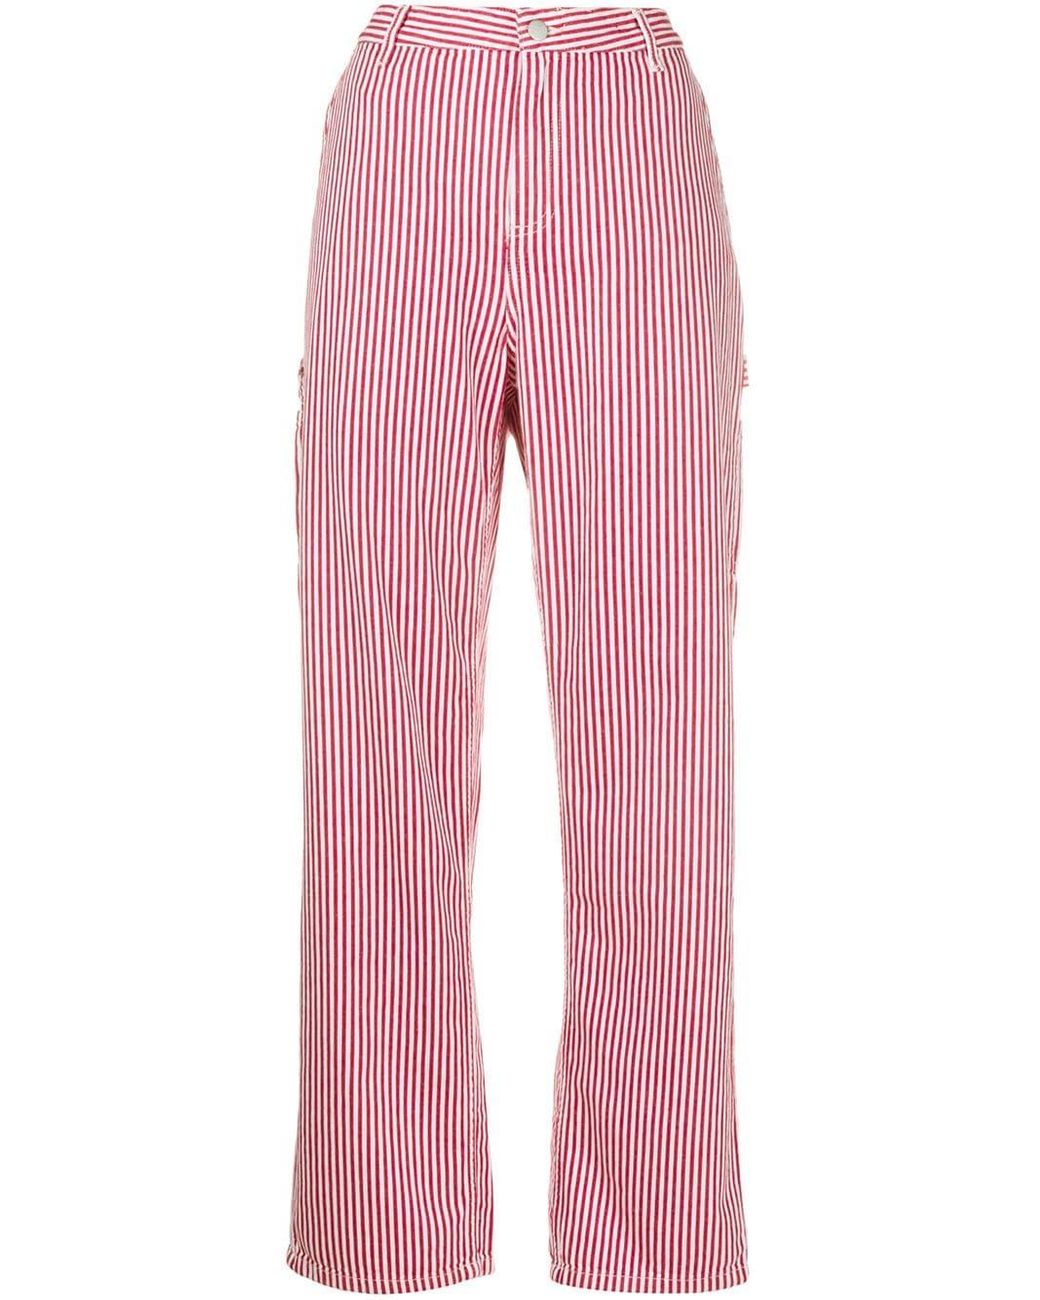 Carhartt WIP Striped Trousers in Red | Lyst